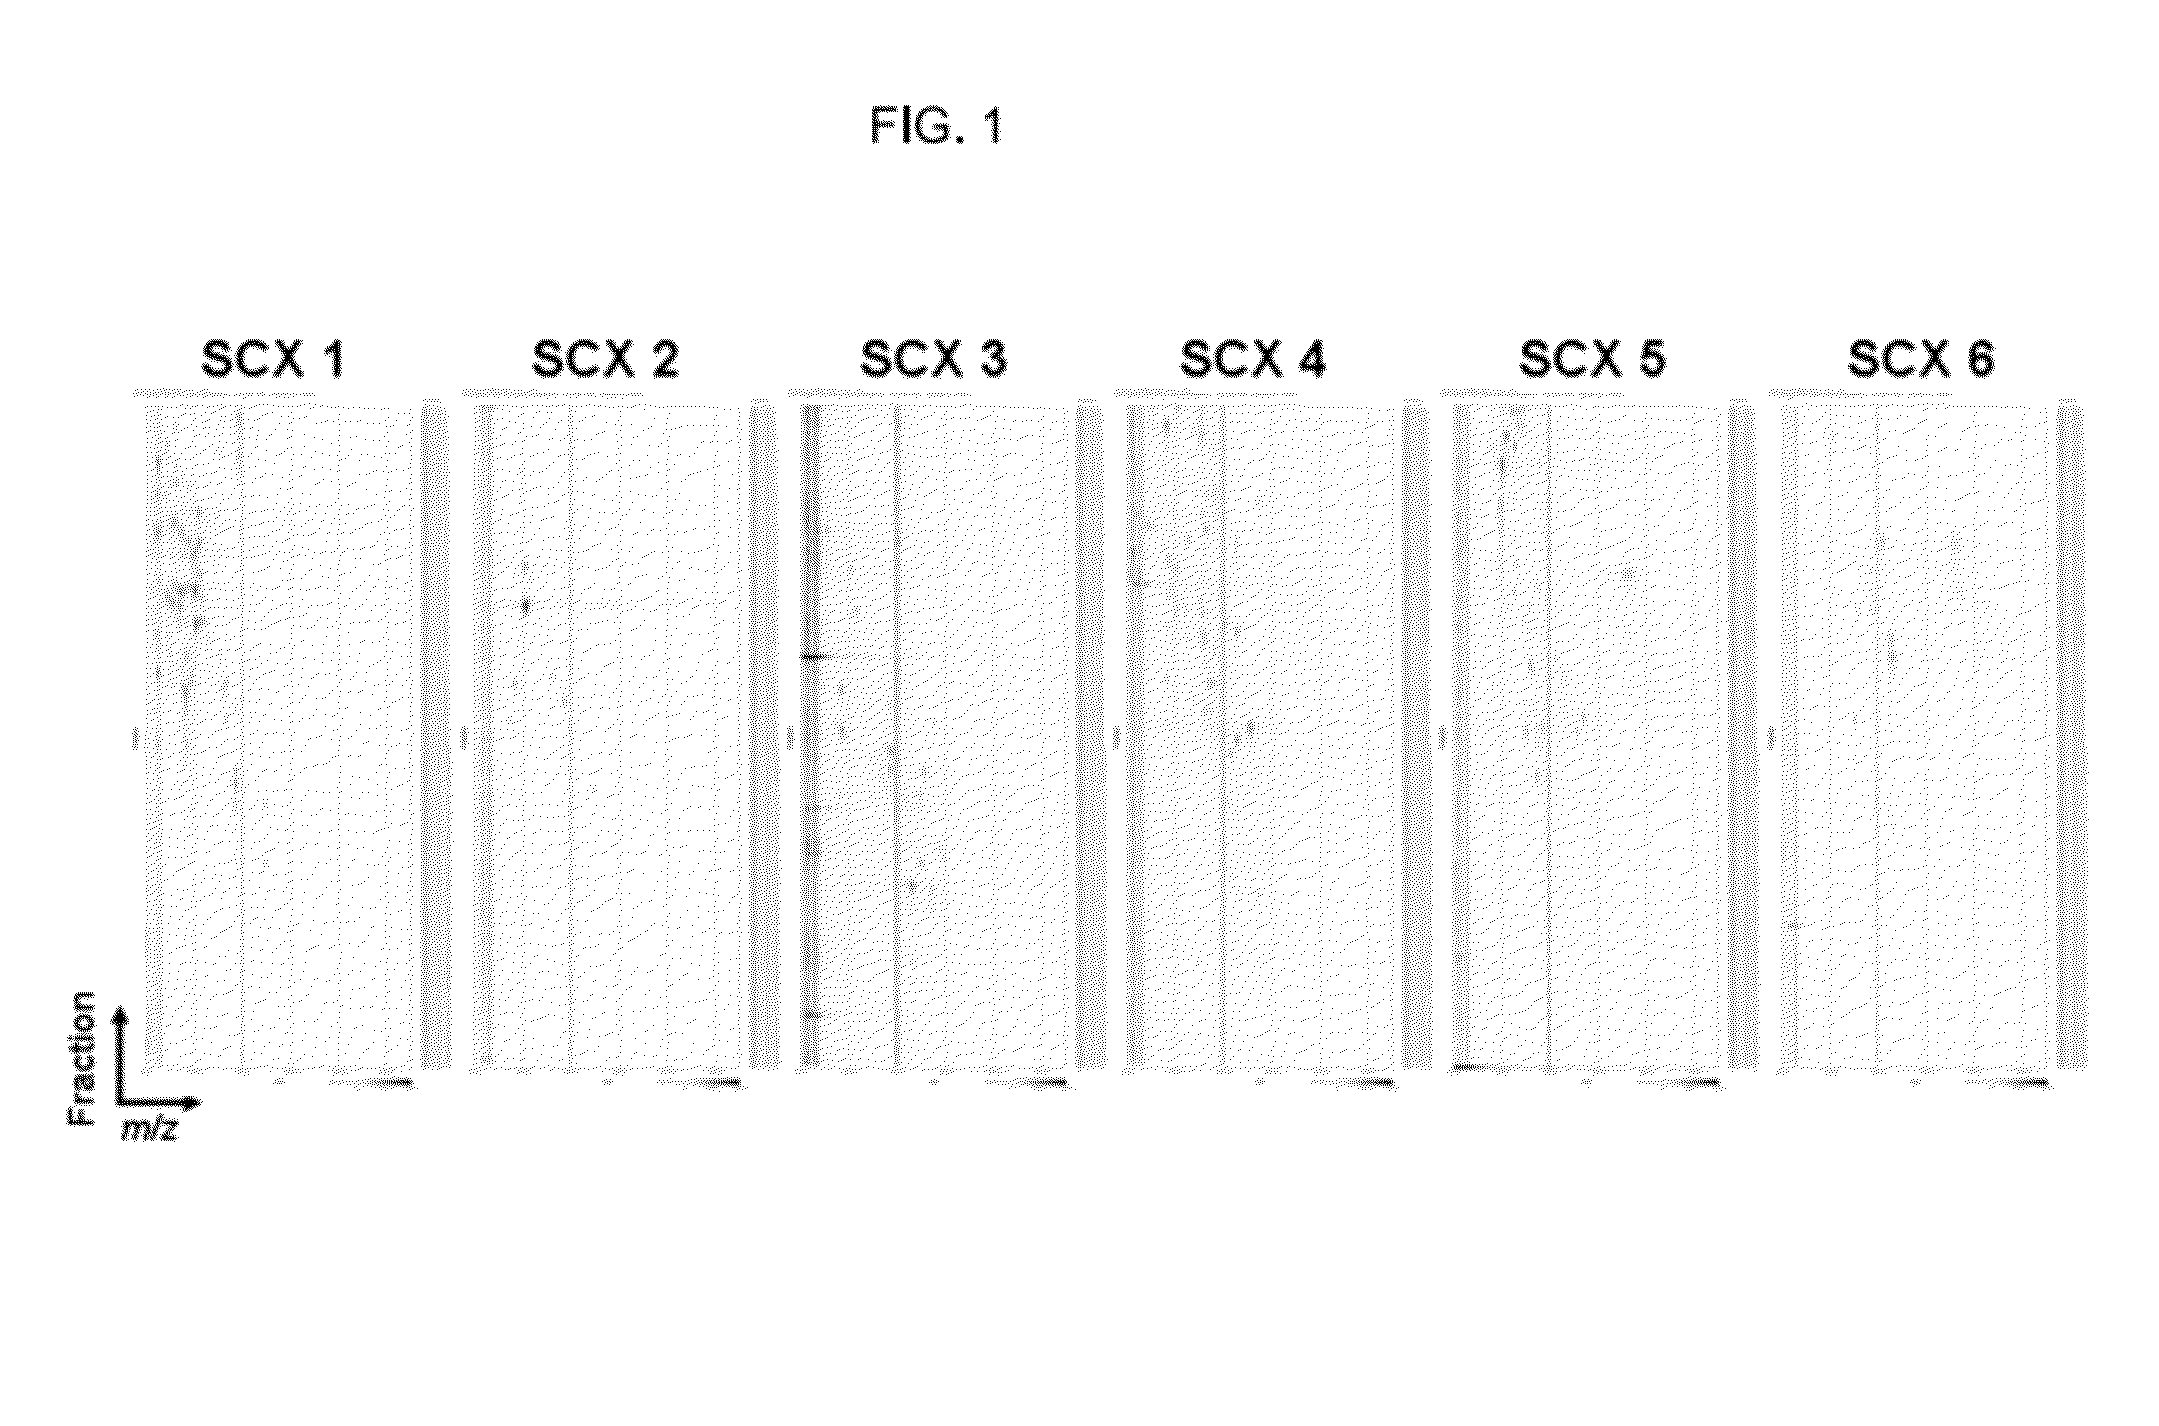 Biomarker for psychiatric diseases including cognitive impairment and methods for detecting psychiatric diseases including cognitive impairment using the biomarkers